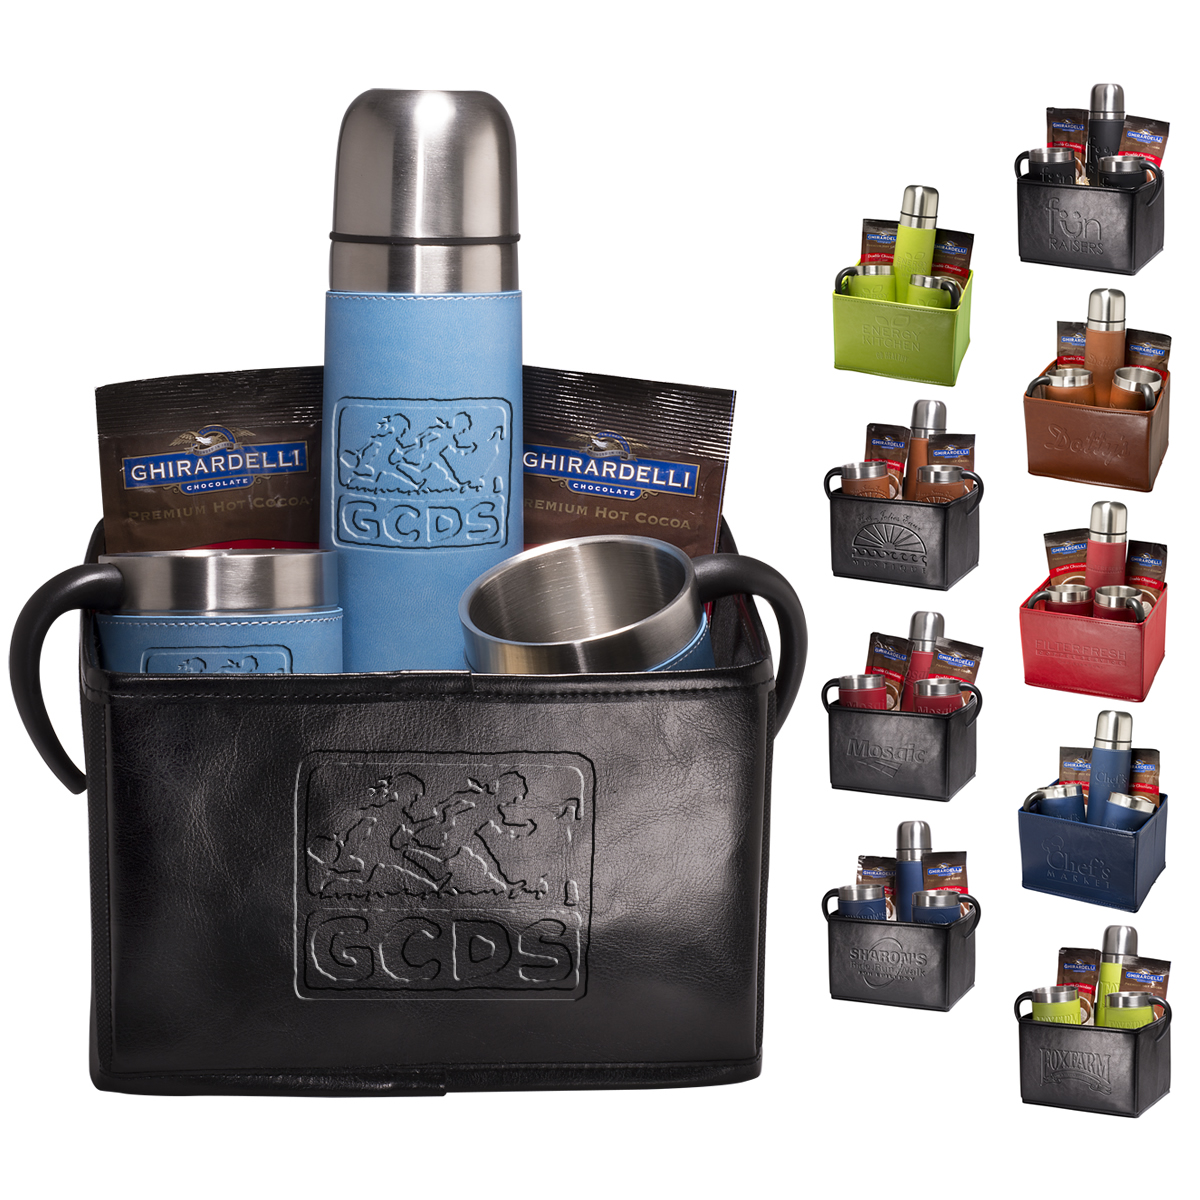 Promotional Tuscany Thermal Bottle, Cups & Ghirardelli® Cocoa Set